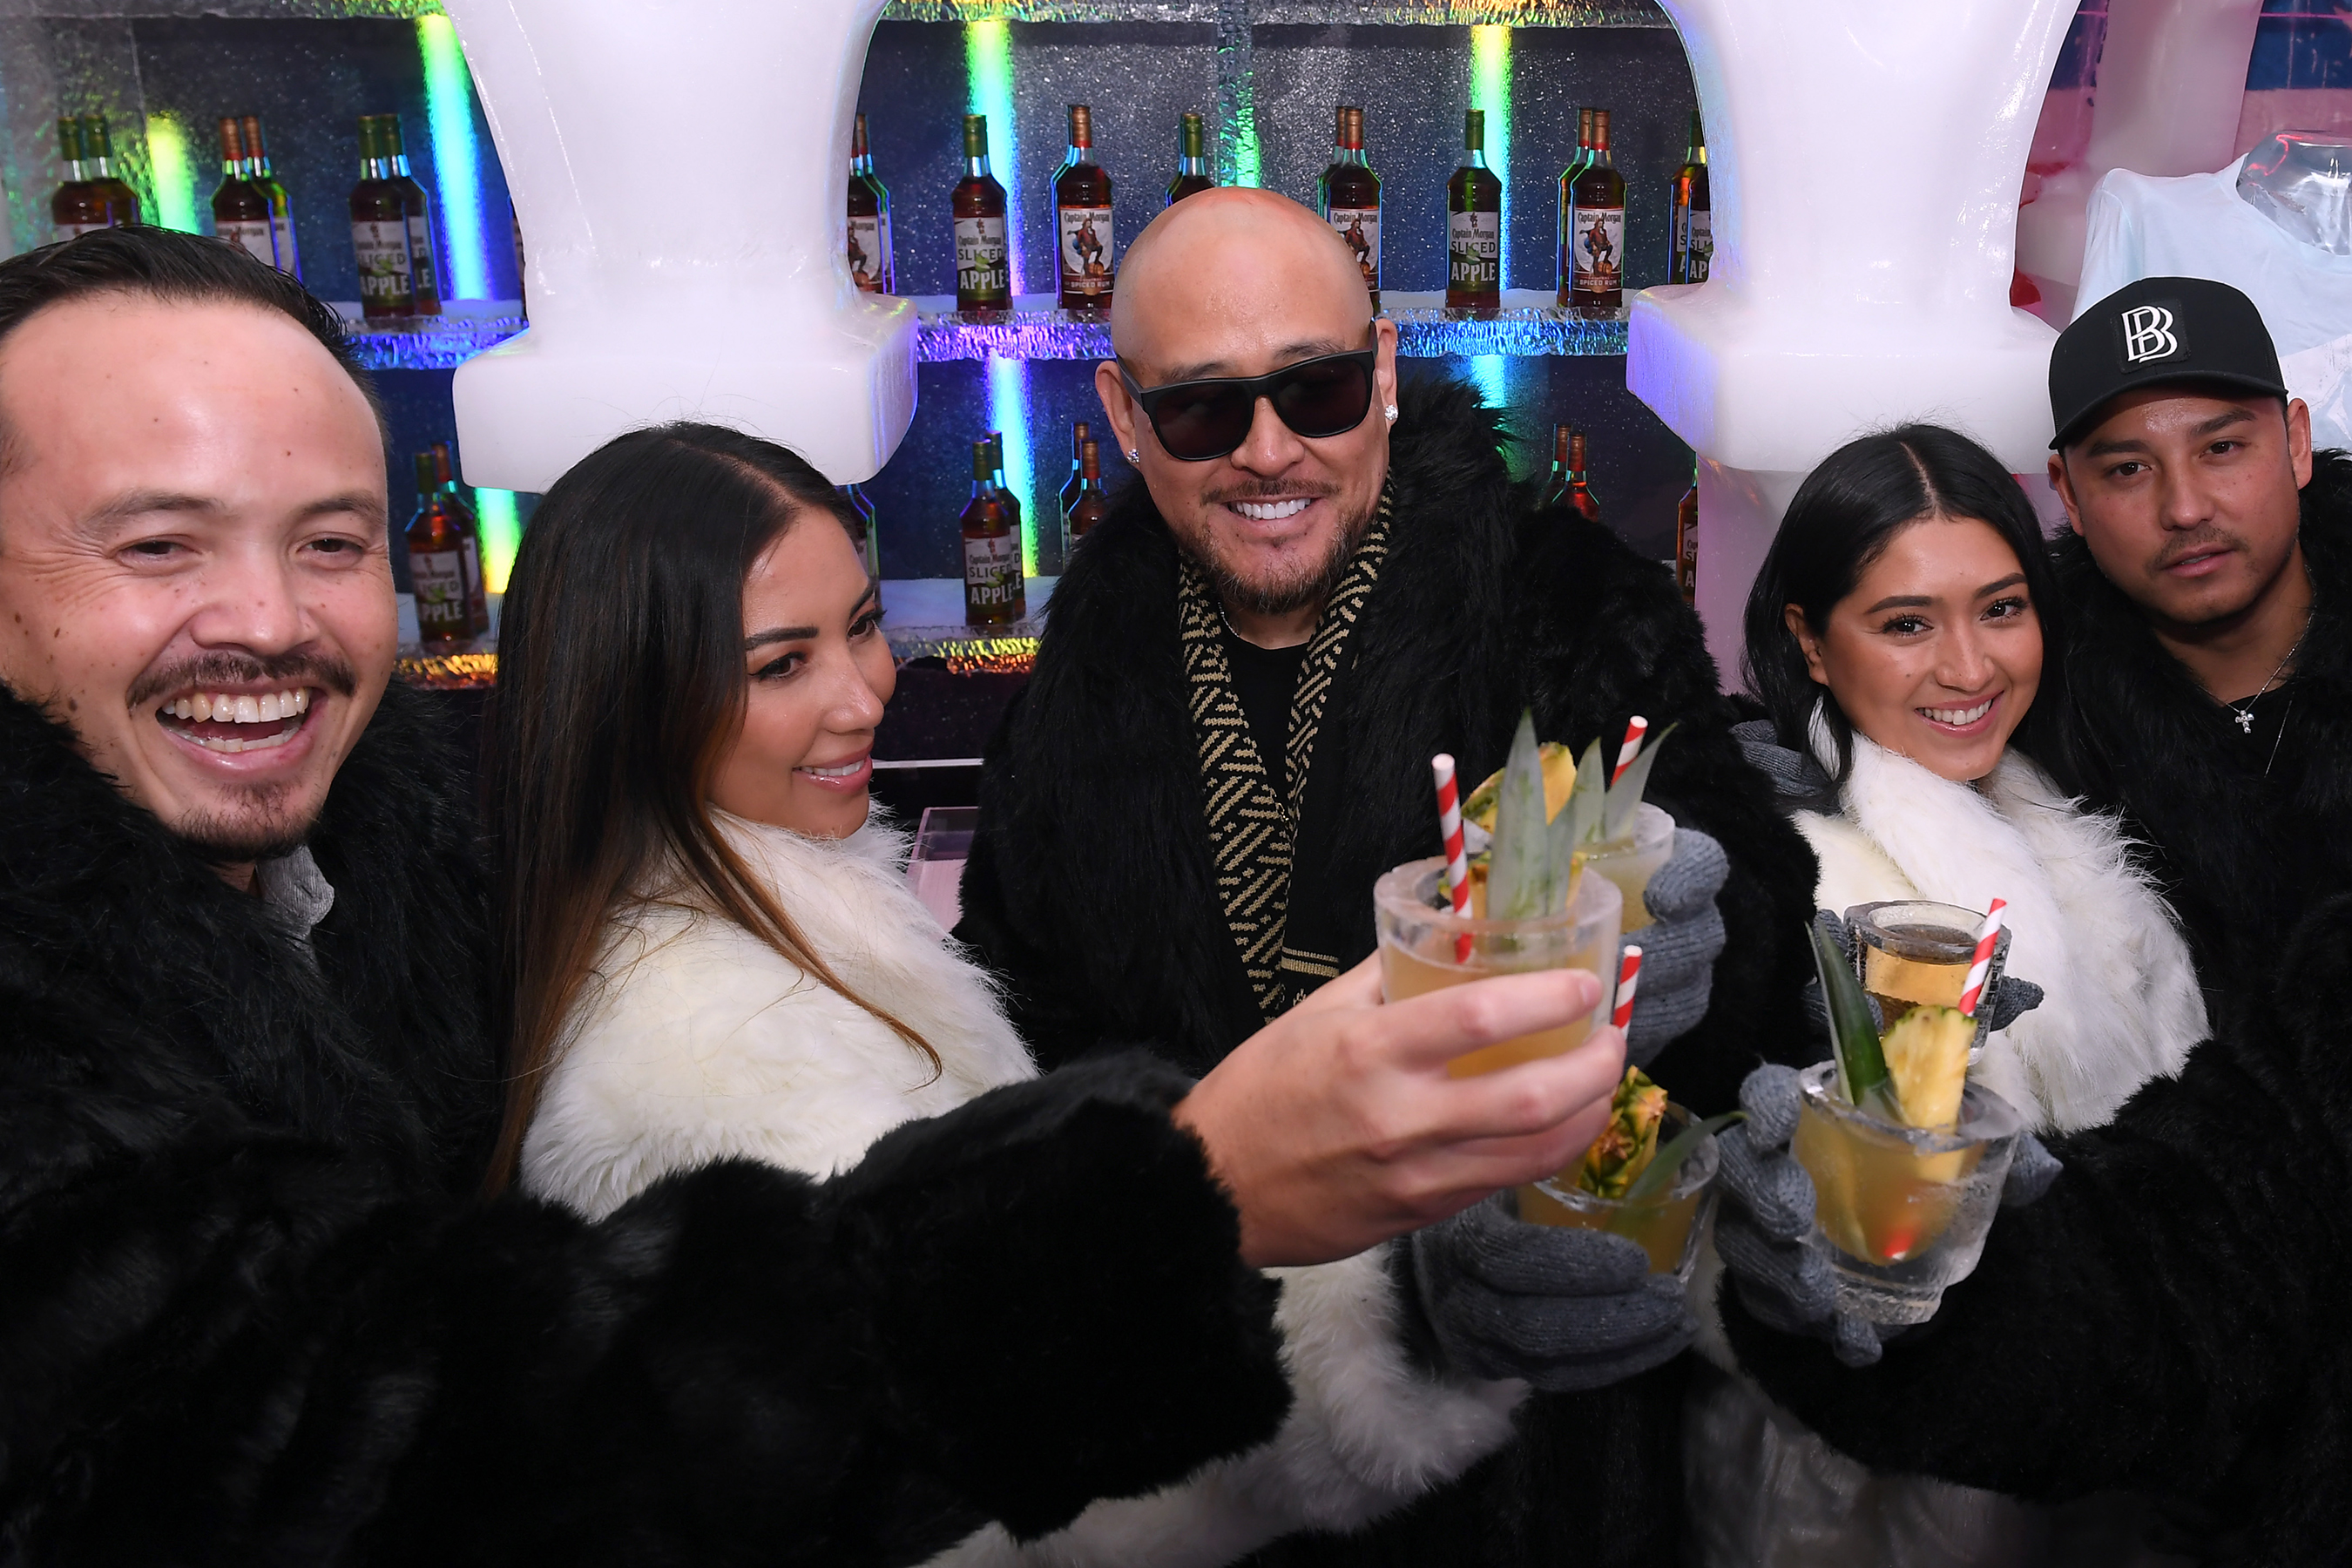 Captain Morgan celebrates partnership launch with iconic jeweler and entrepreneur, Ben Baller in Las Vegas, Nevada on Wednesday, August 11, 2021. 